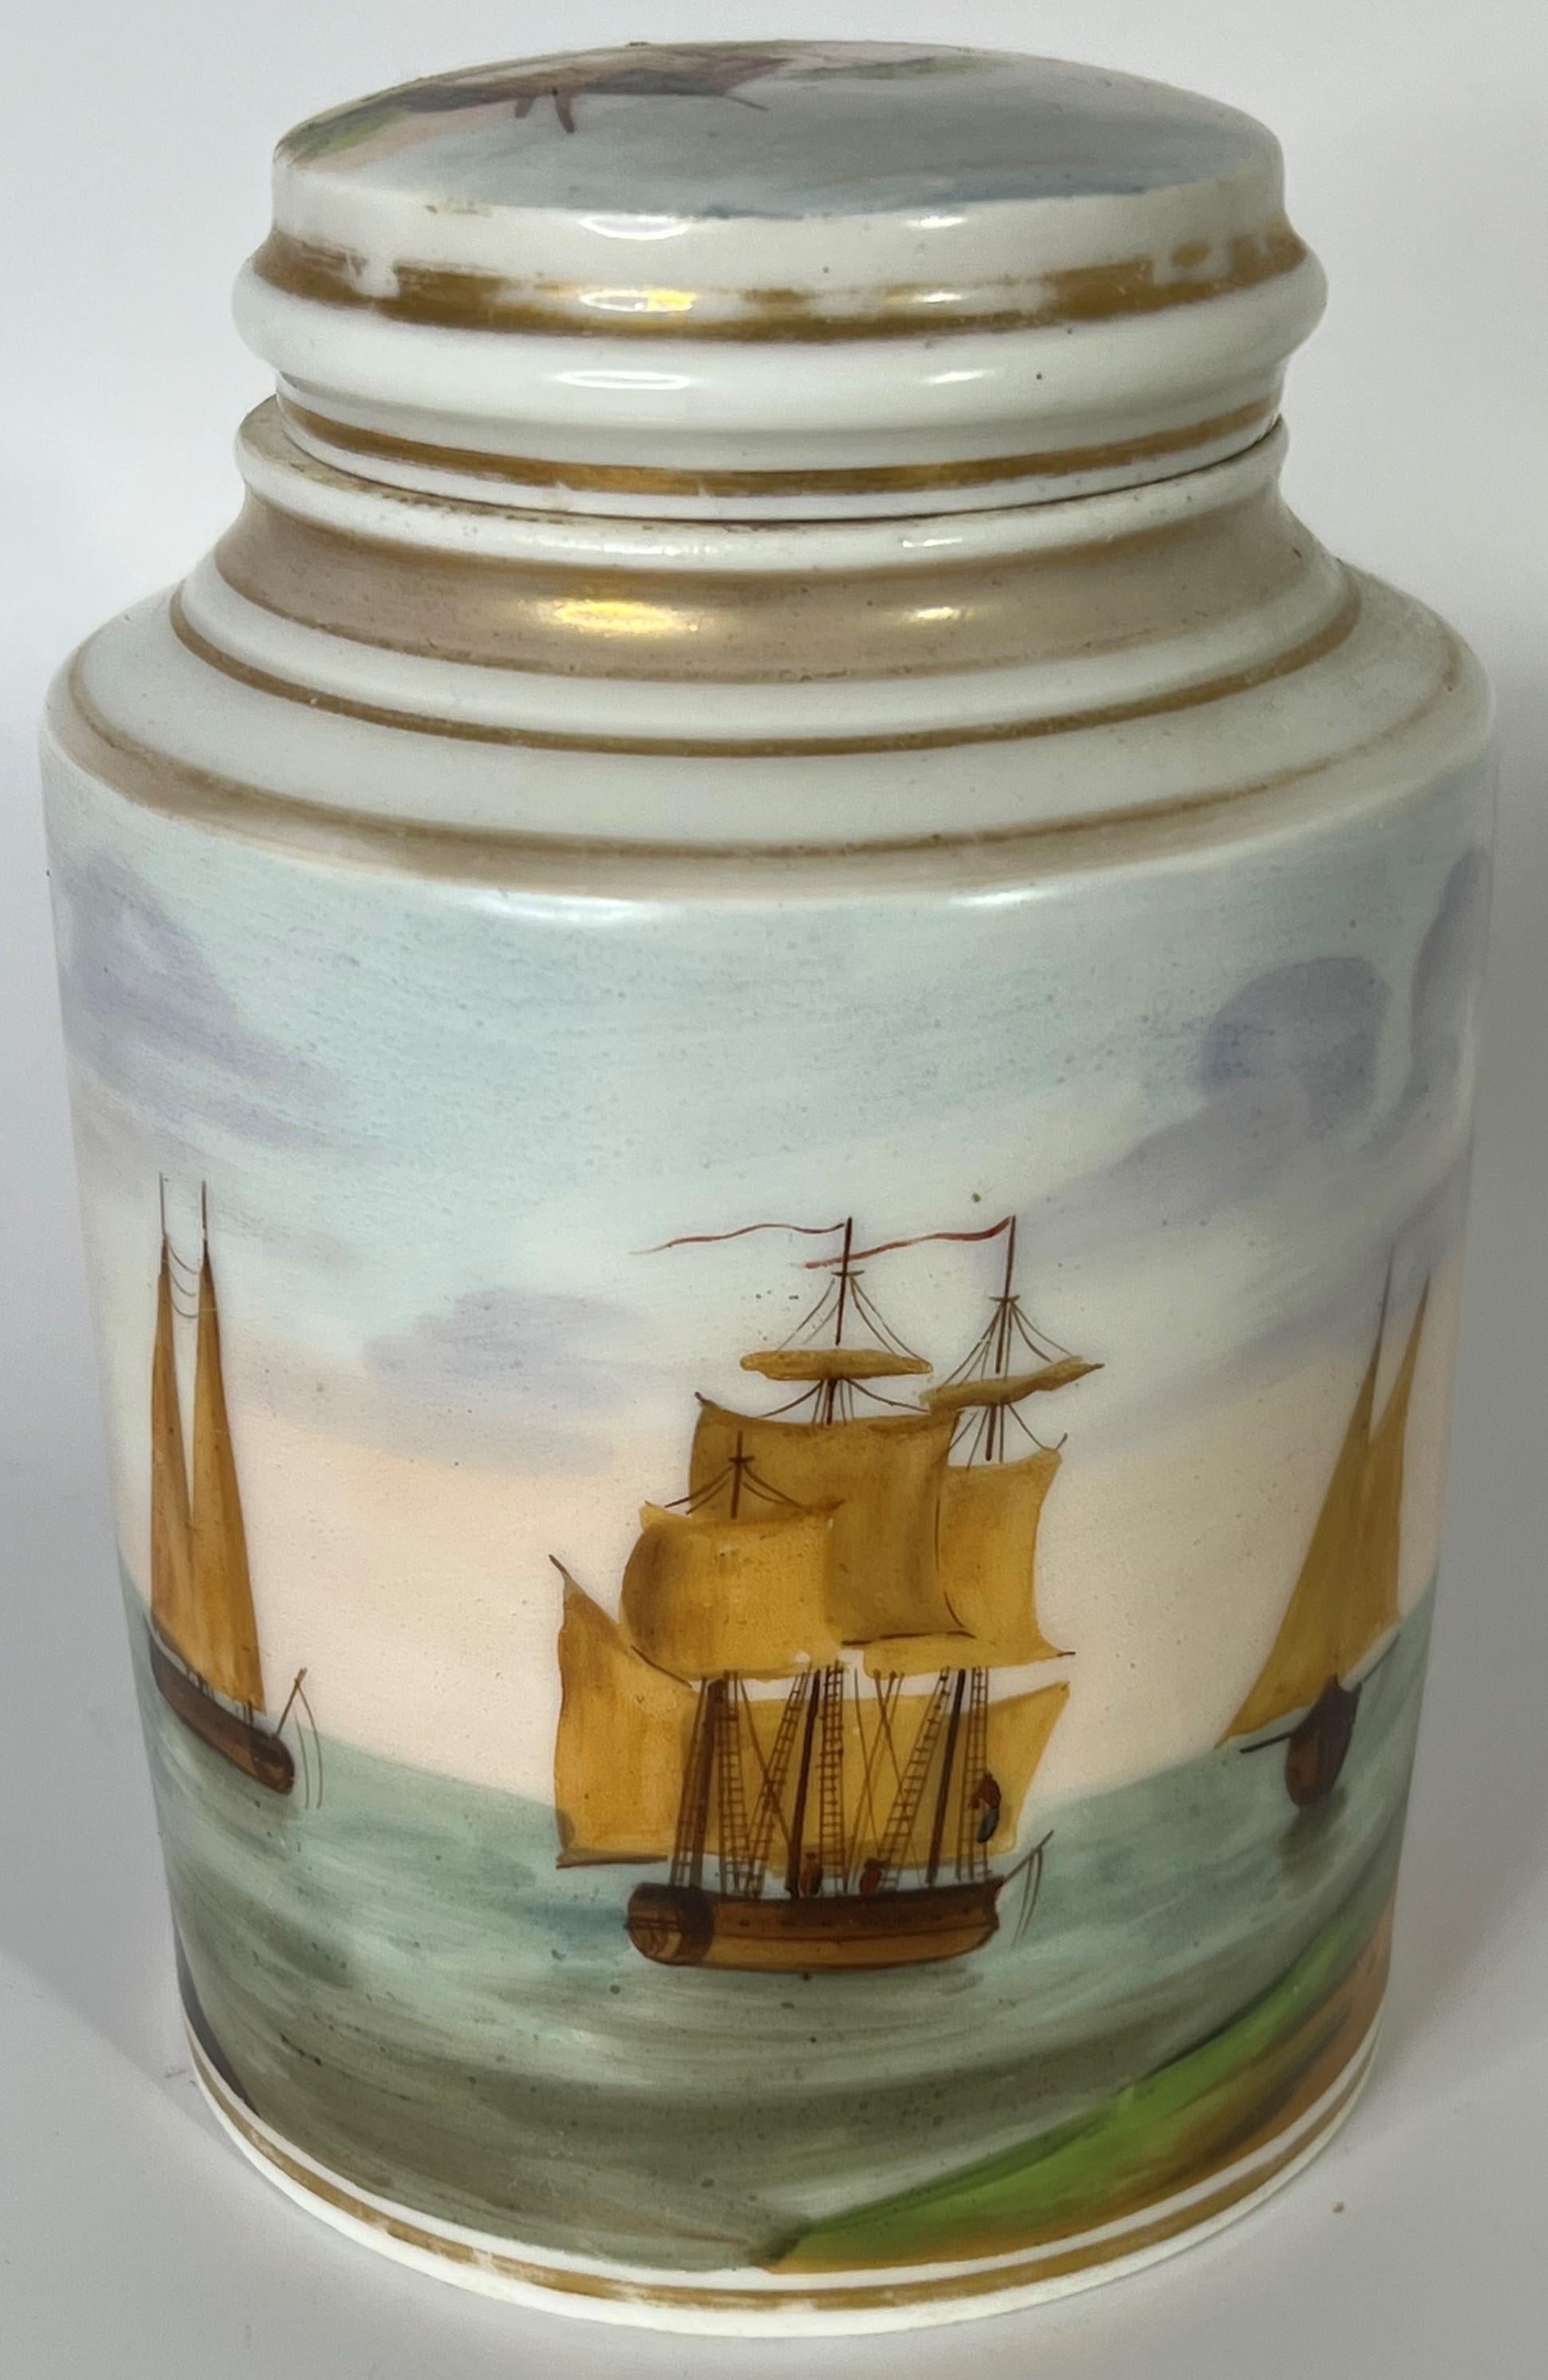 This empire period Old Paris tea caddy, canister or jar from the 1830's is sure to delight. It was likely designed and sold as a tea canister, but a lidded jar can certainly serve many functions. The painted harbor scene is typical of those more